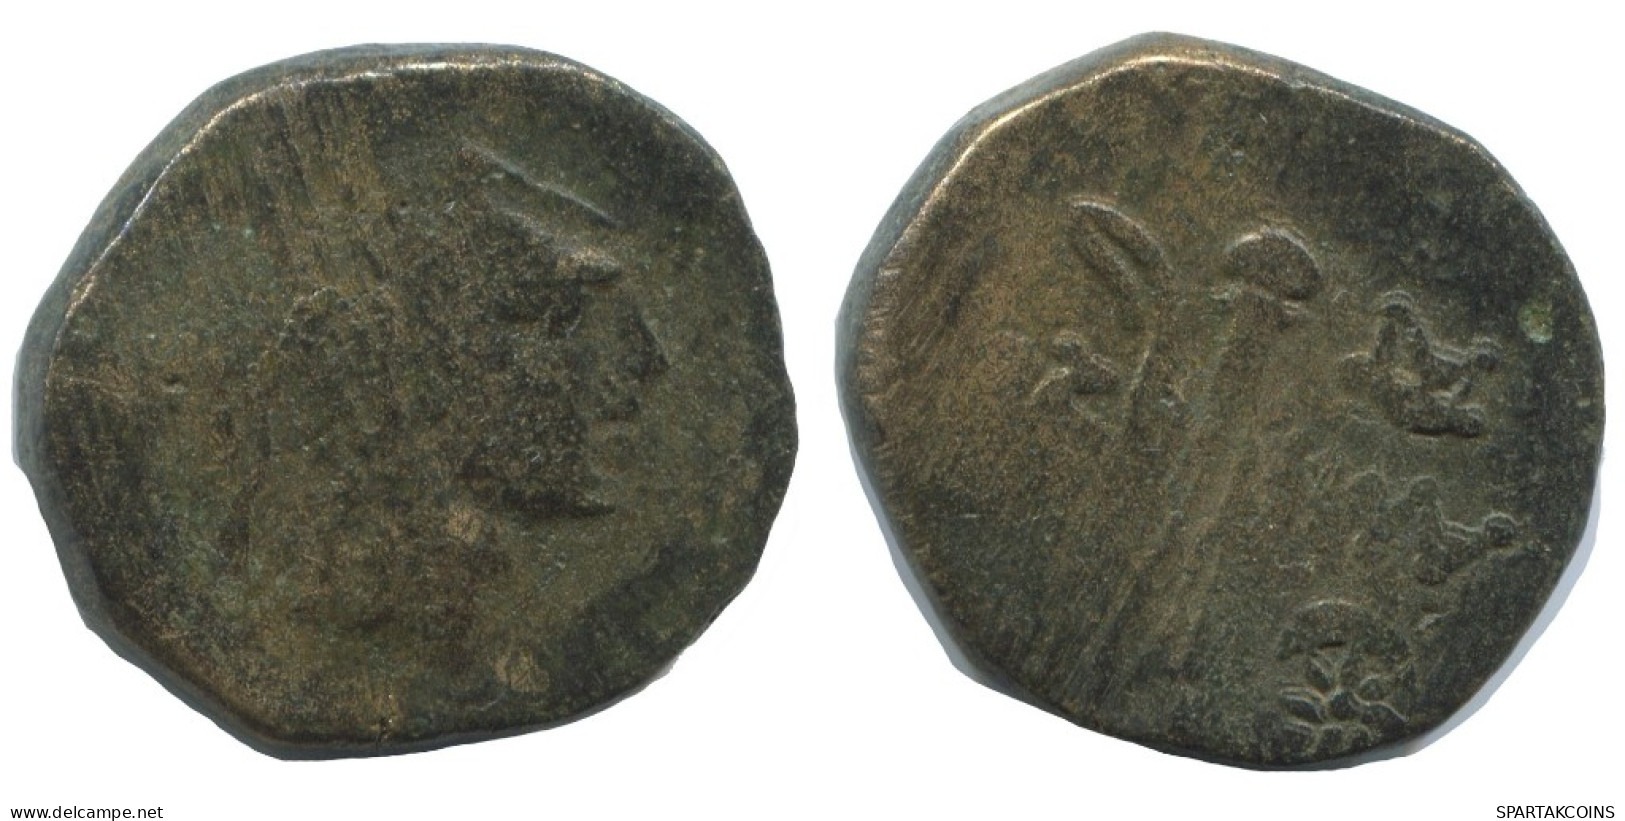 THESSALONICA IN MACEDONIA AE ARTEMIS BOW & QUIVER 8.5g/21mm #AF779.25.F.A - Greek